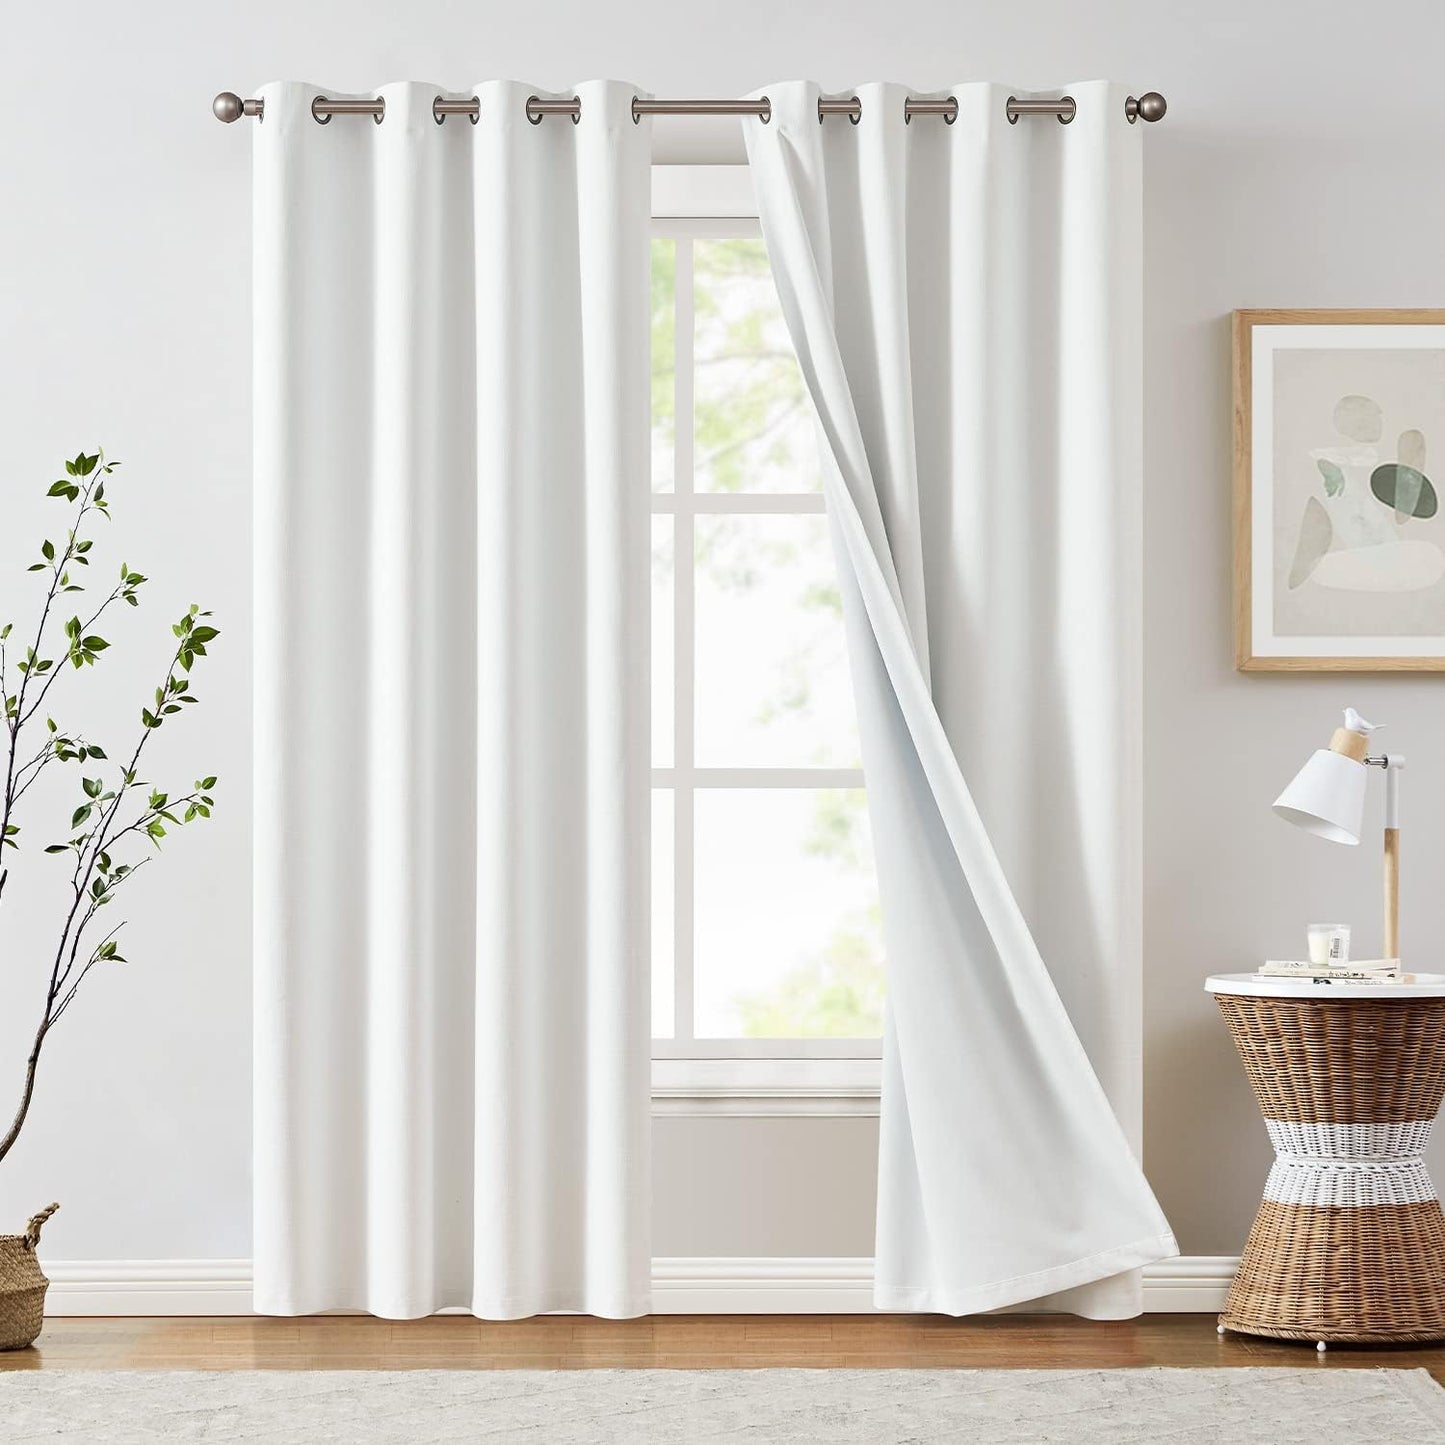 JINCHAN 100% Blackout Curtains for Bedroom, 90 Inch Length Linen Textured Drapes for Living Room, Thermal Insulated Full Light Blocking Curtains, Grommet Top Window Treatments 2 Panels Heathered White  CKNY HOME FASHION Textured | Off White W50 X L90 